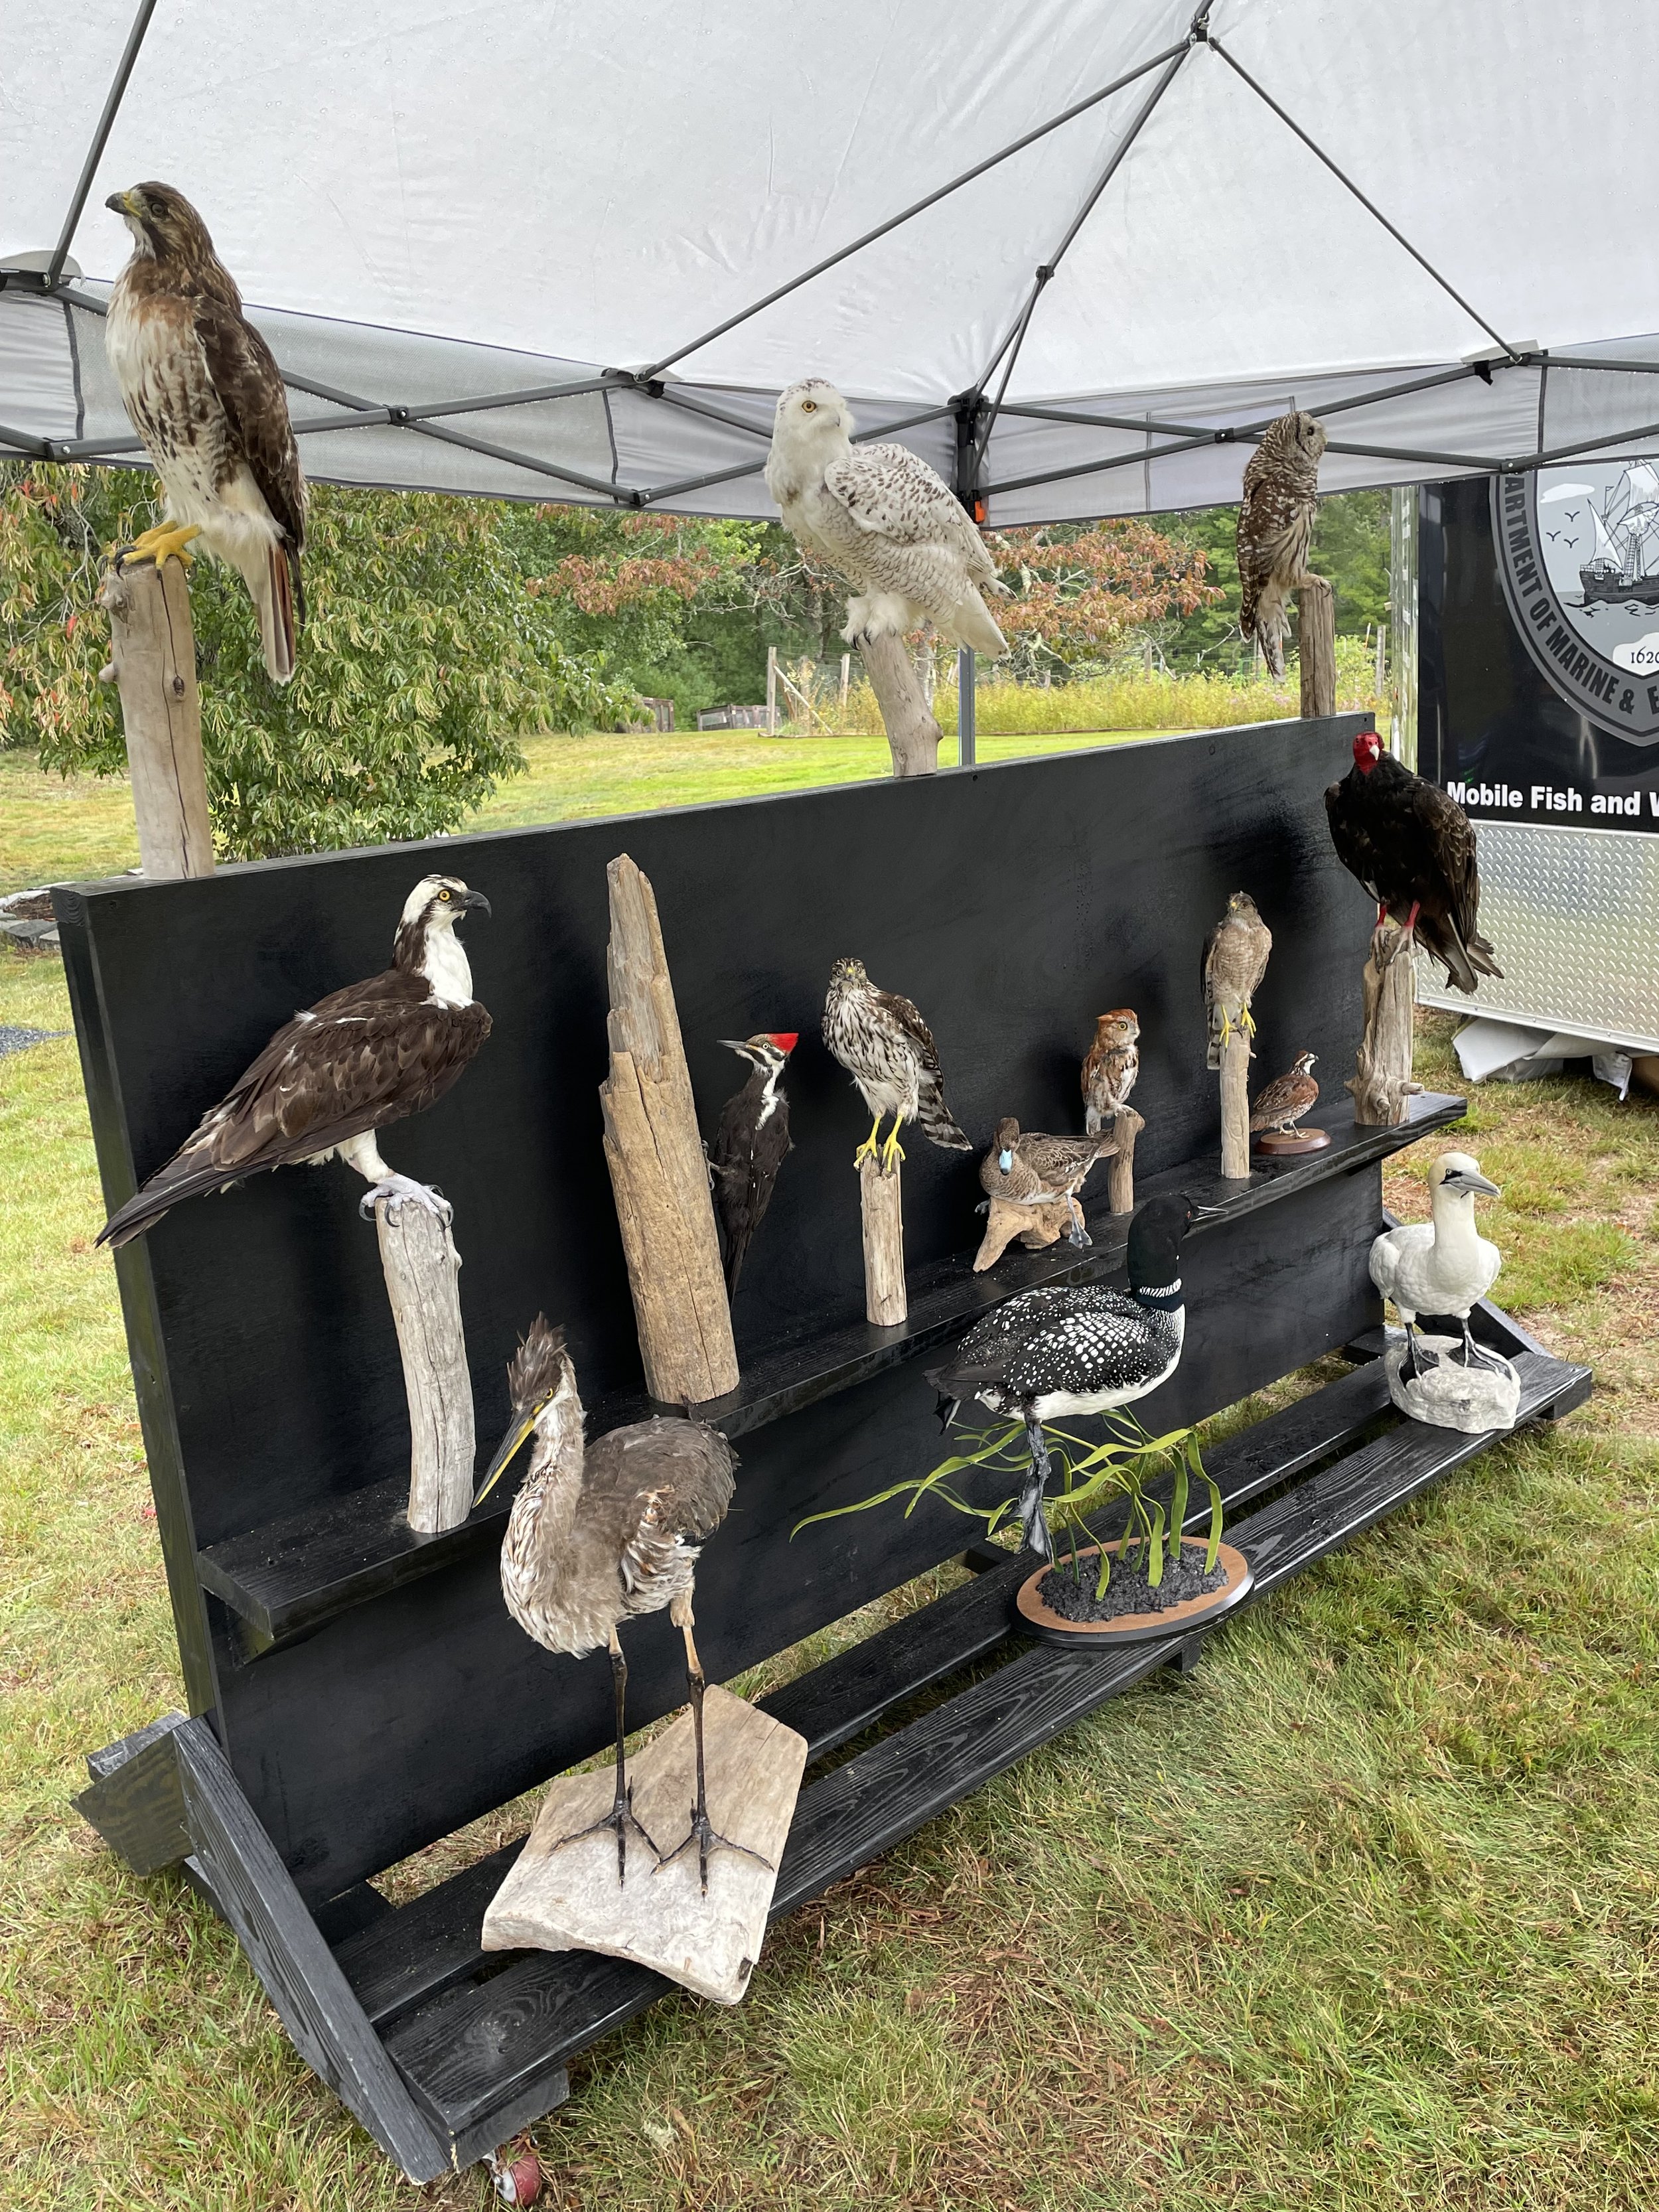 Taxidermy birds from the Town of Plymouth's wildlife education trailer.